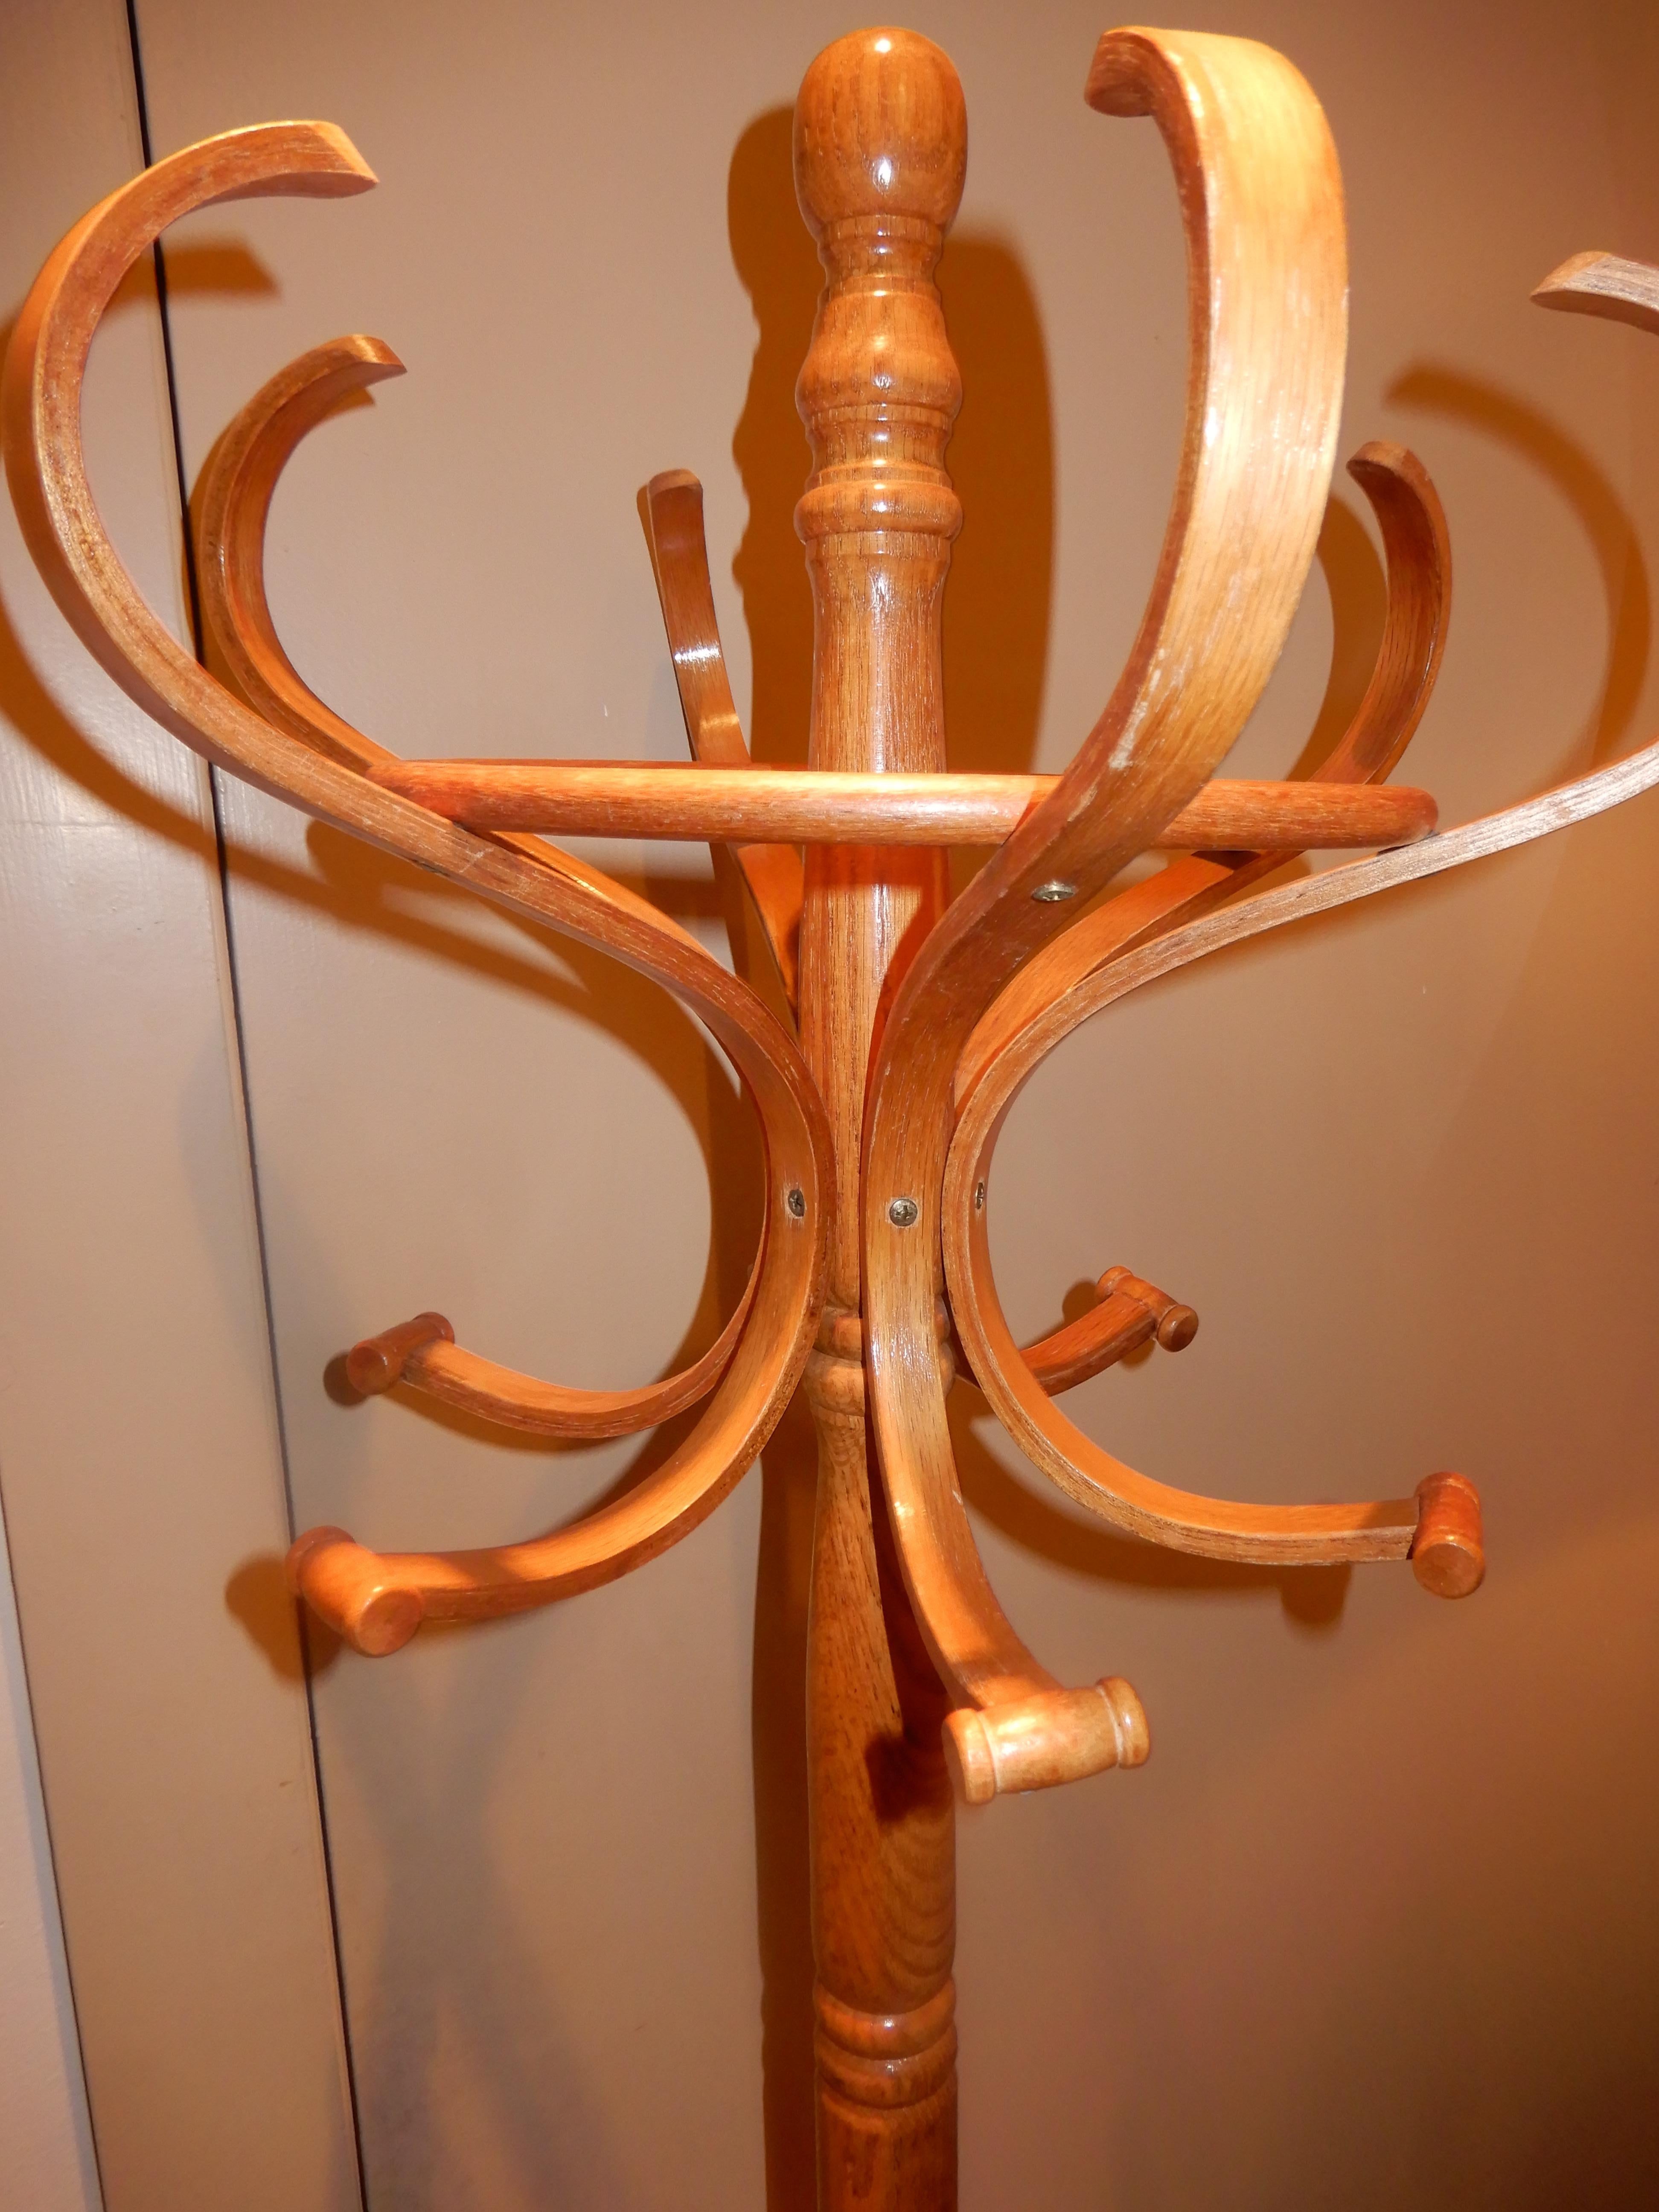 American made 1960s handcrafted coat stand. The top section turns and has six hooks on both levels.